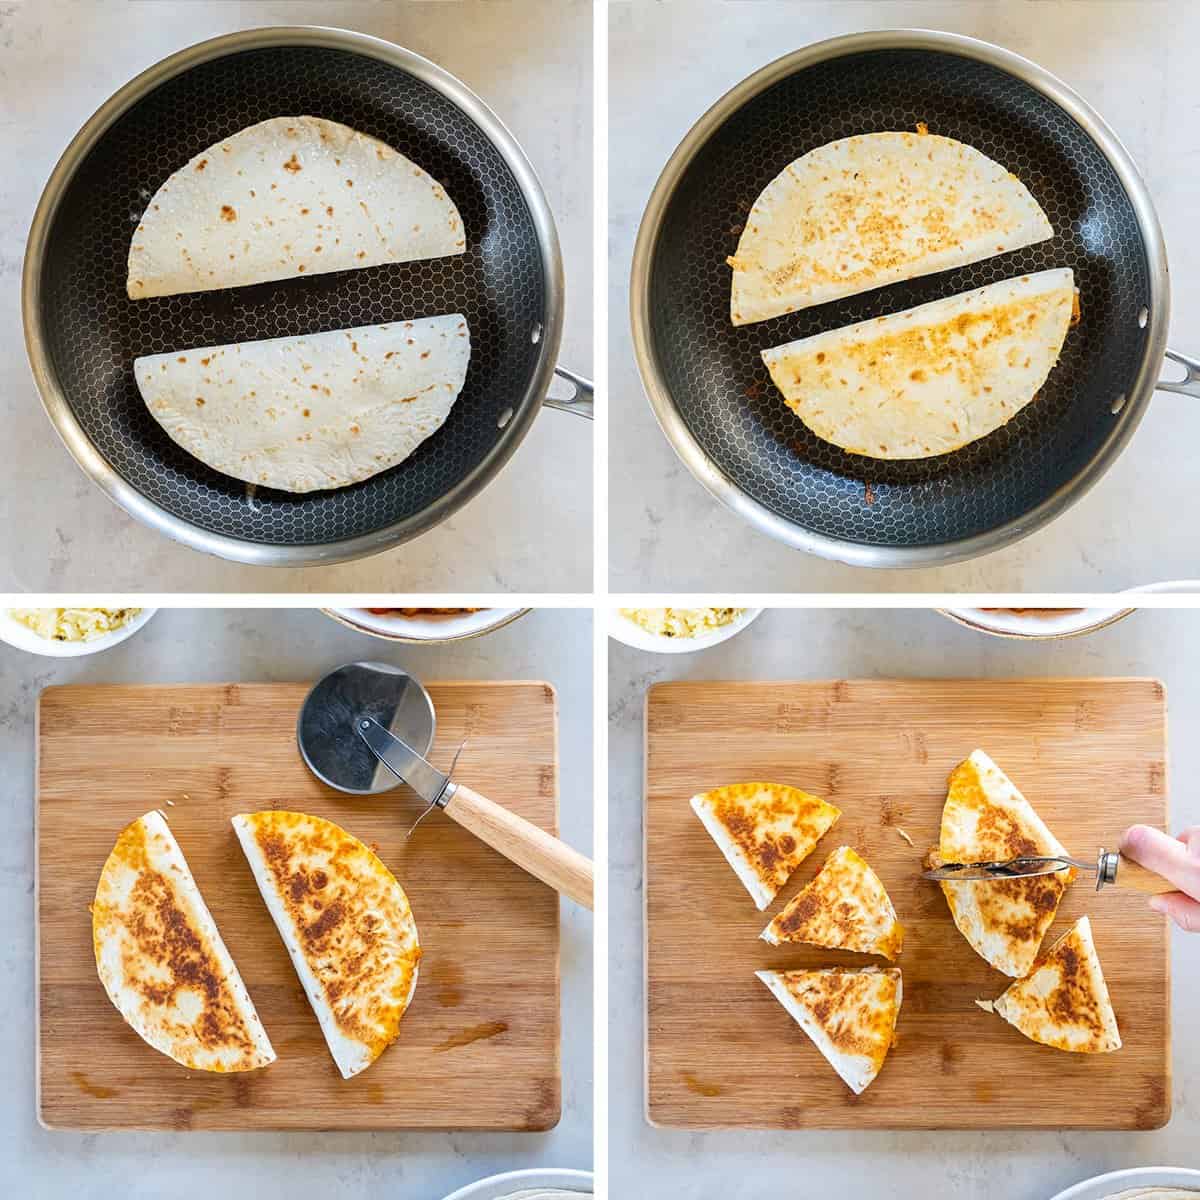 Four images showing fajitas cooking in a skillet and being cut into wedges with a pizza cutter on a cutting board.